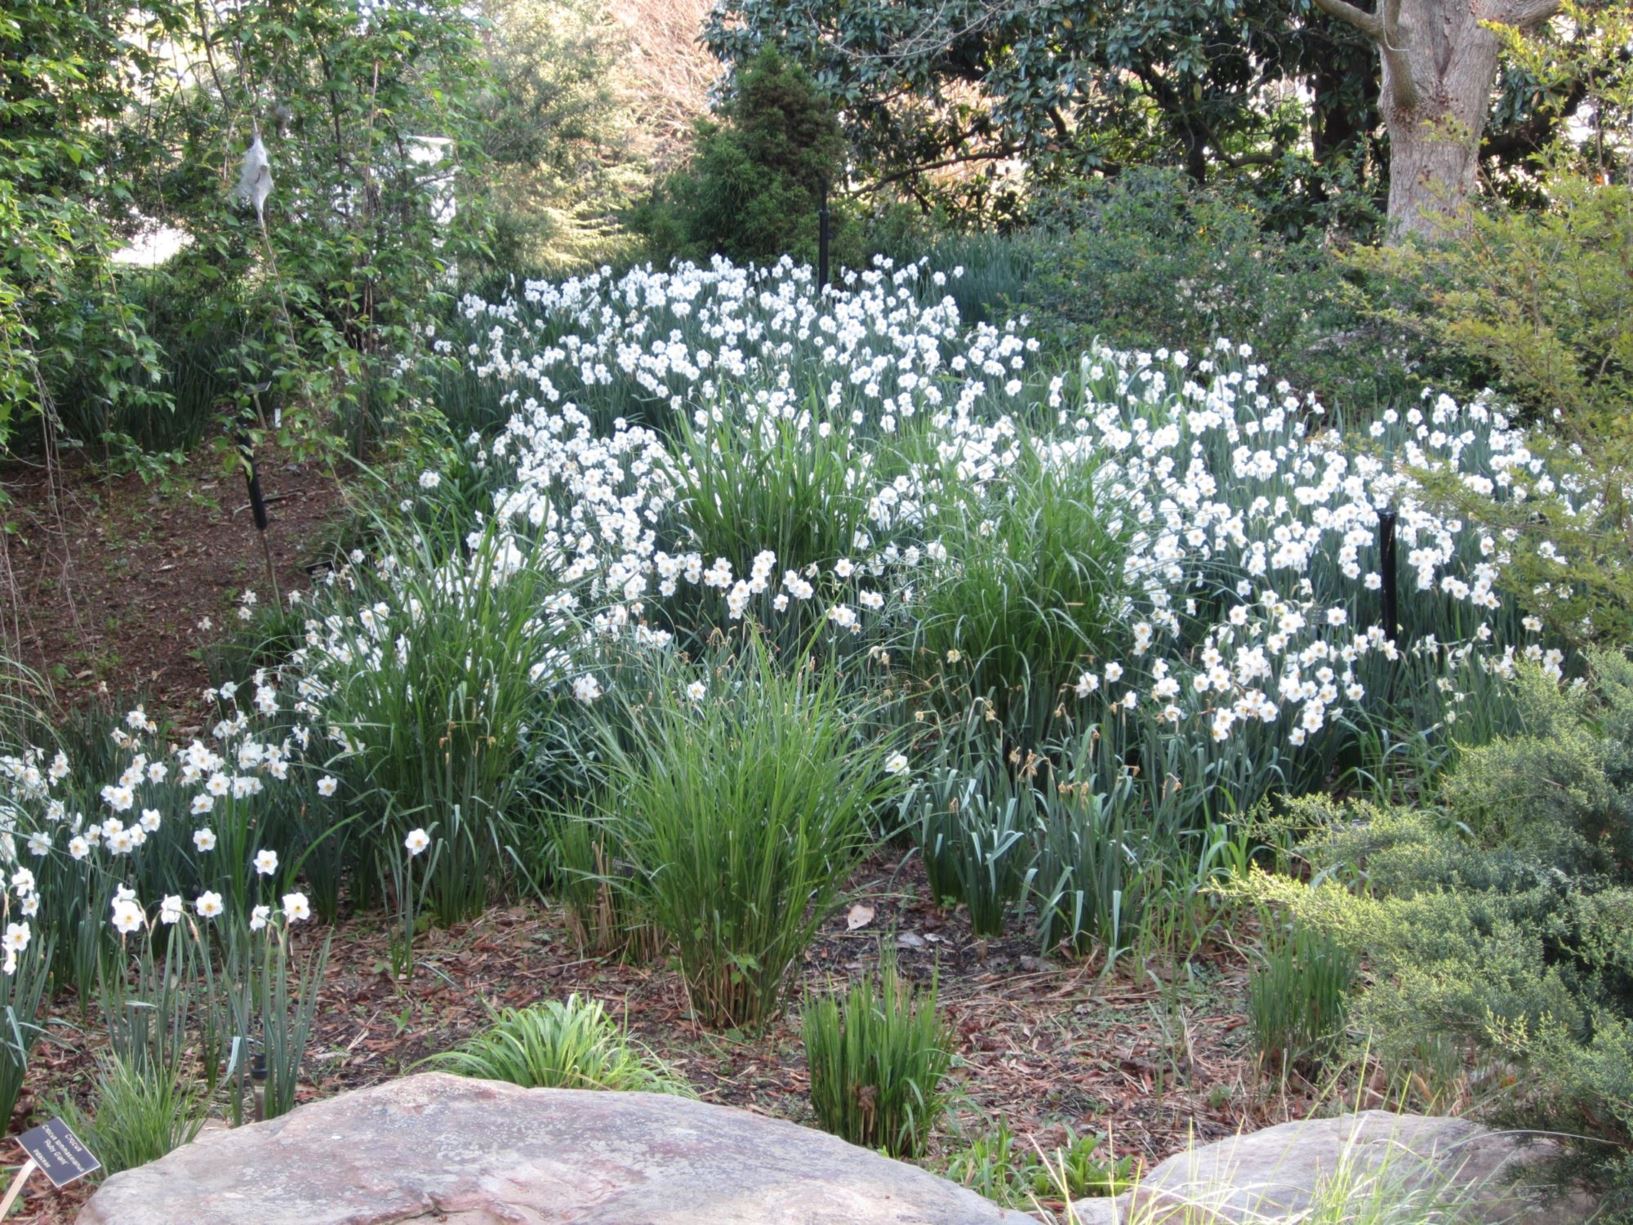 Narcissus 'Peaceful Valley' - poeticus daffodil